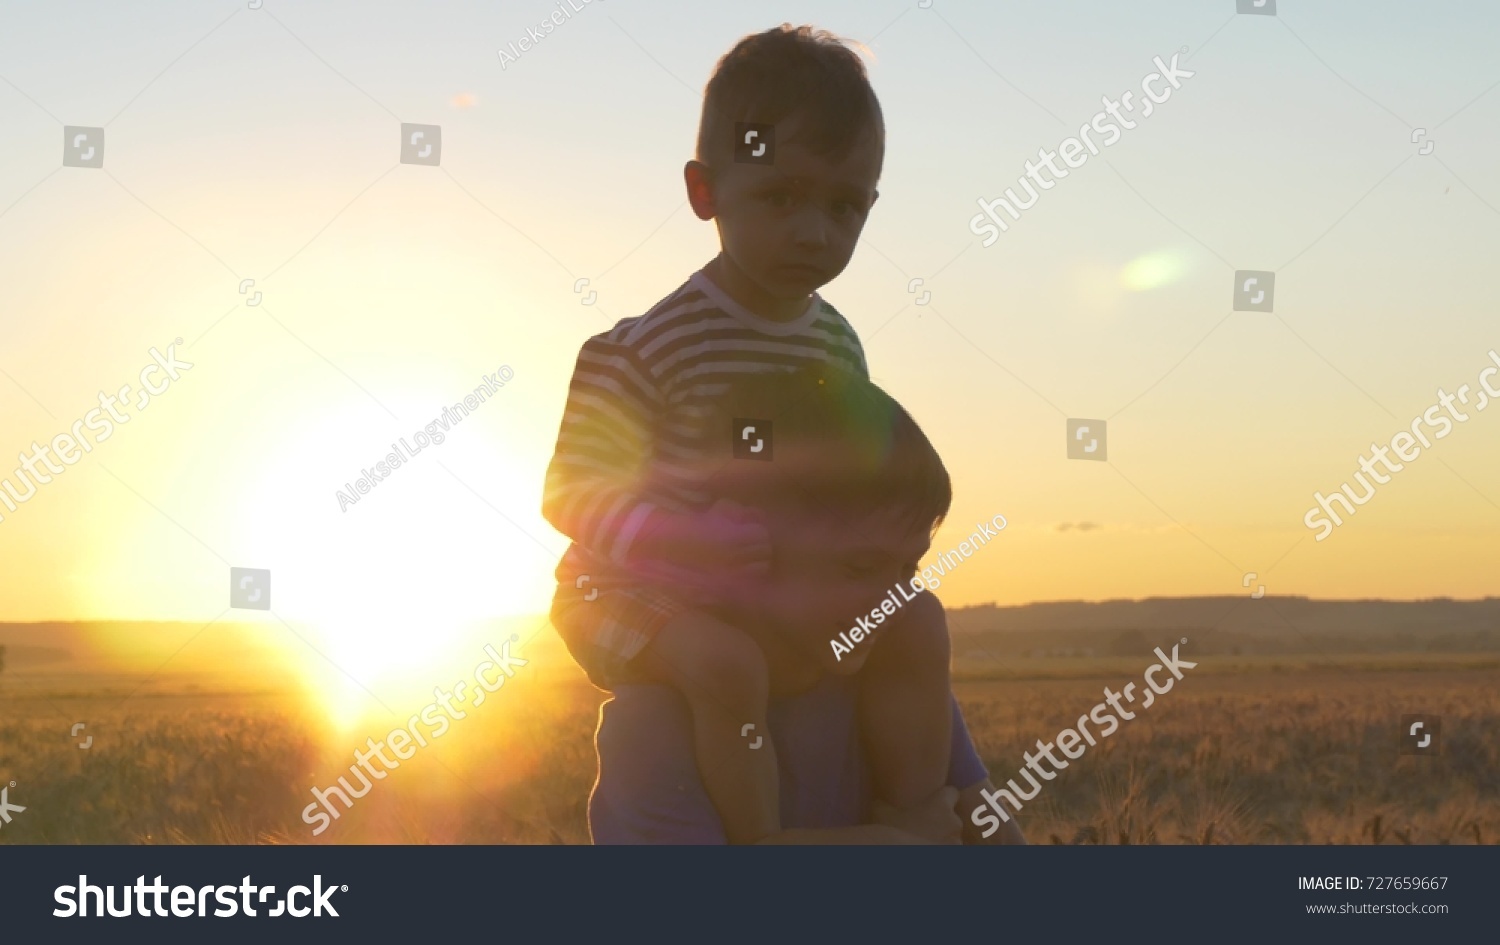 Two boys playing at sunset in a wheat field among golden spikelets #727659667